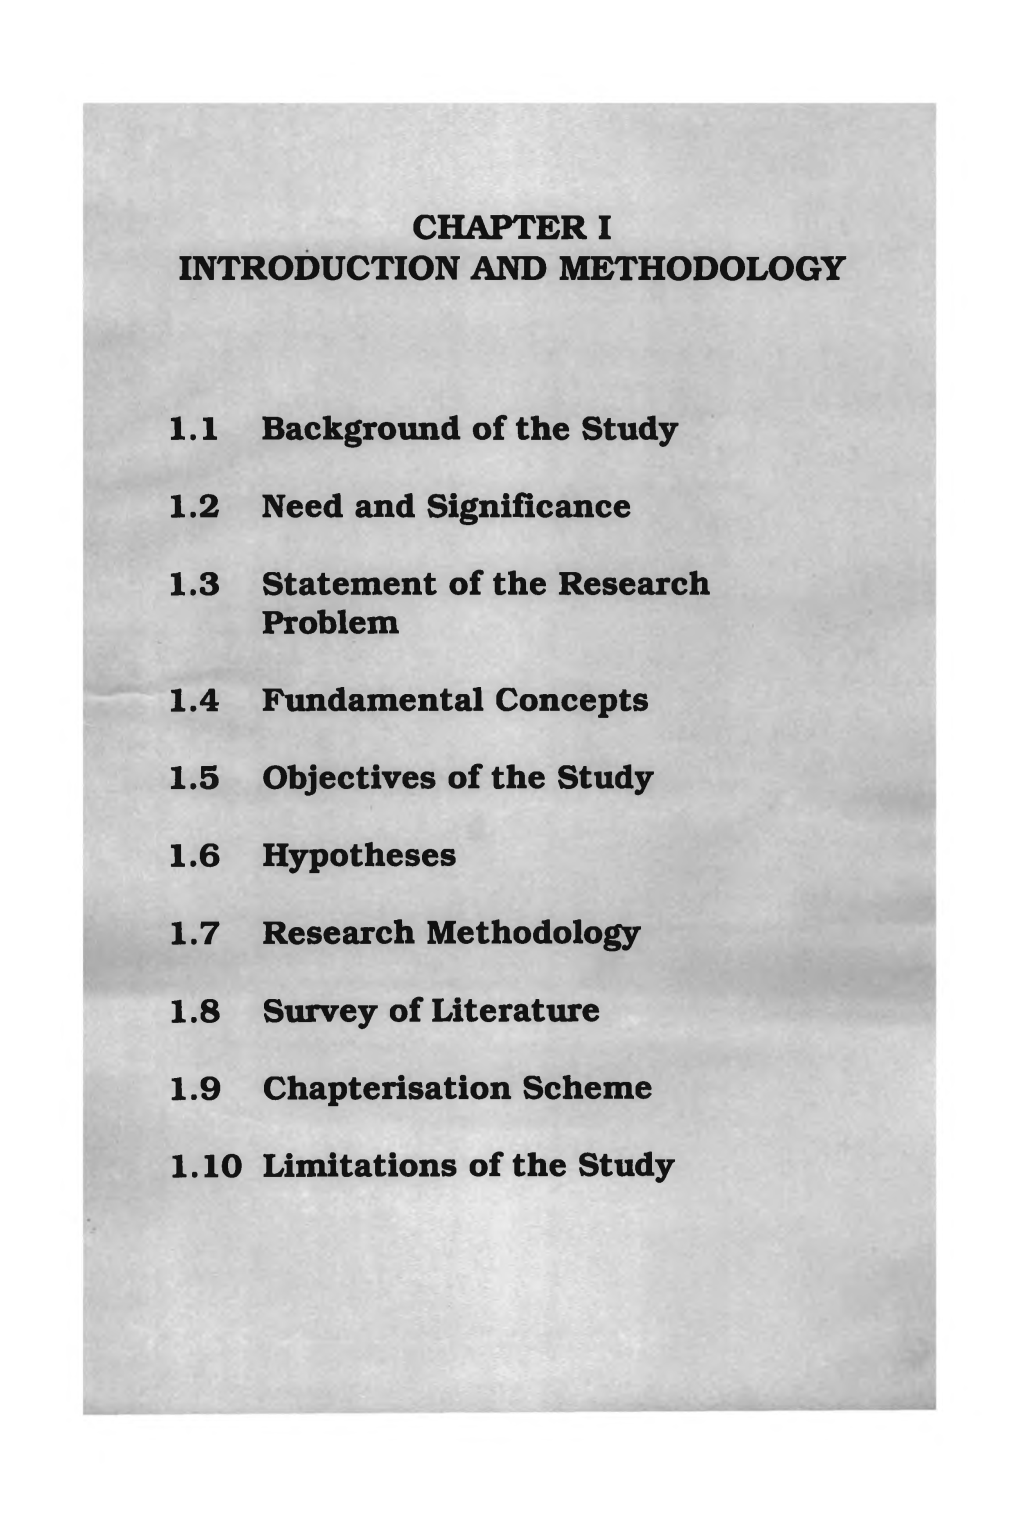 CHAPTER I INTRODUCTION and METHODOLOGY 1.1 Background of the Study 1.2 Need and Significance 1.3 Statement of the Research Probl